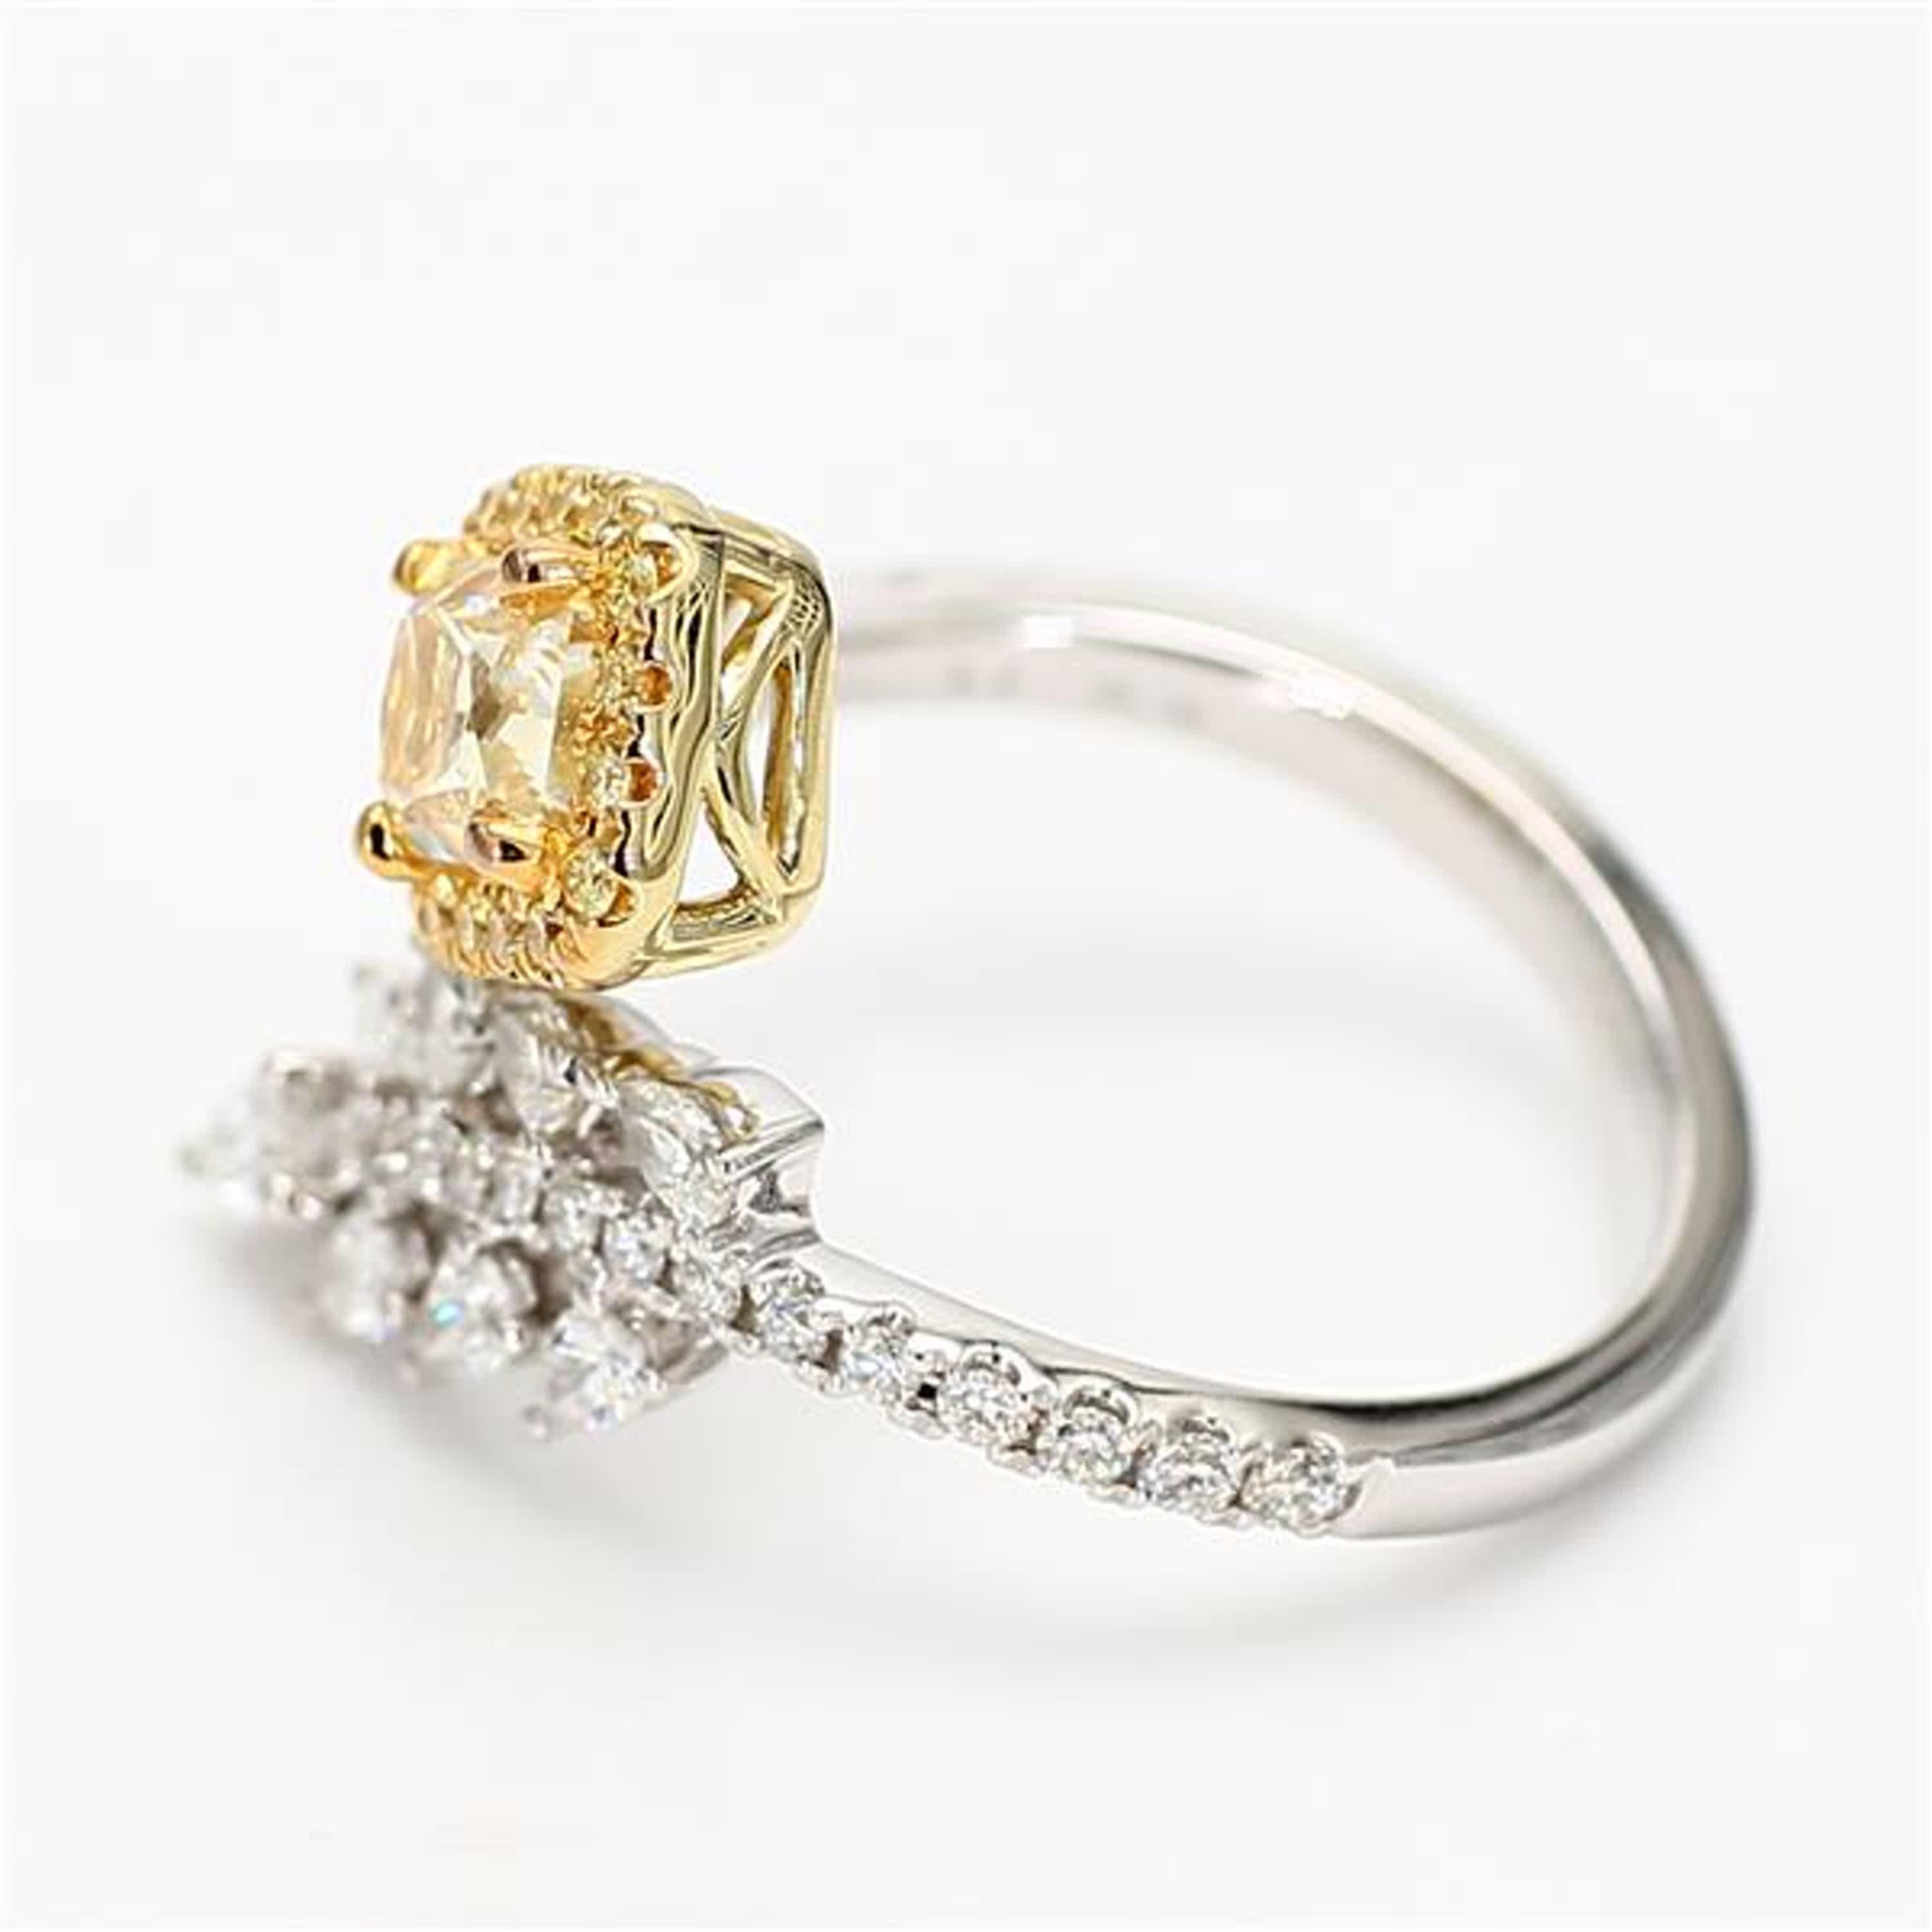 Radiant Cut GIA Certified Natural Yellow Radiant Diamond 1.78 Carat TW Gold Cocktail Ring